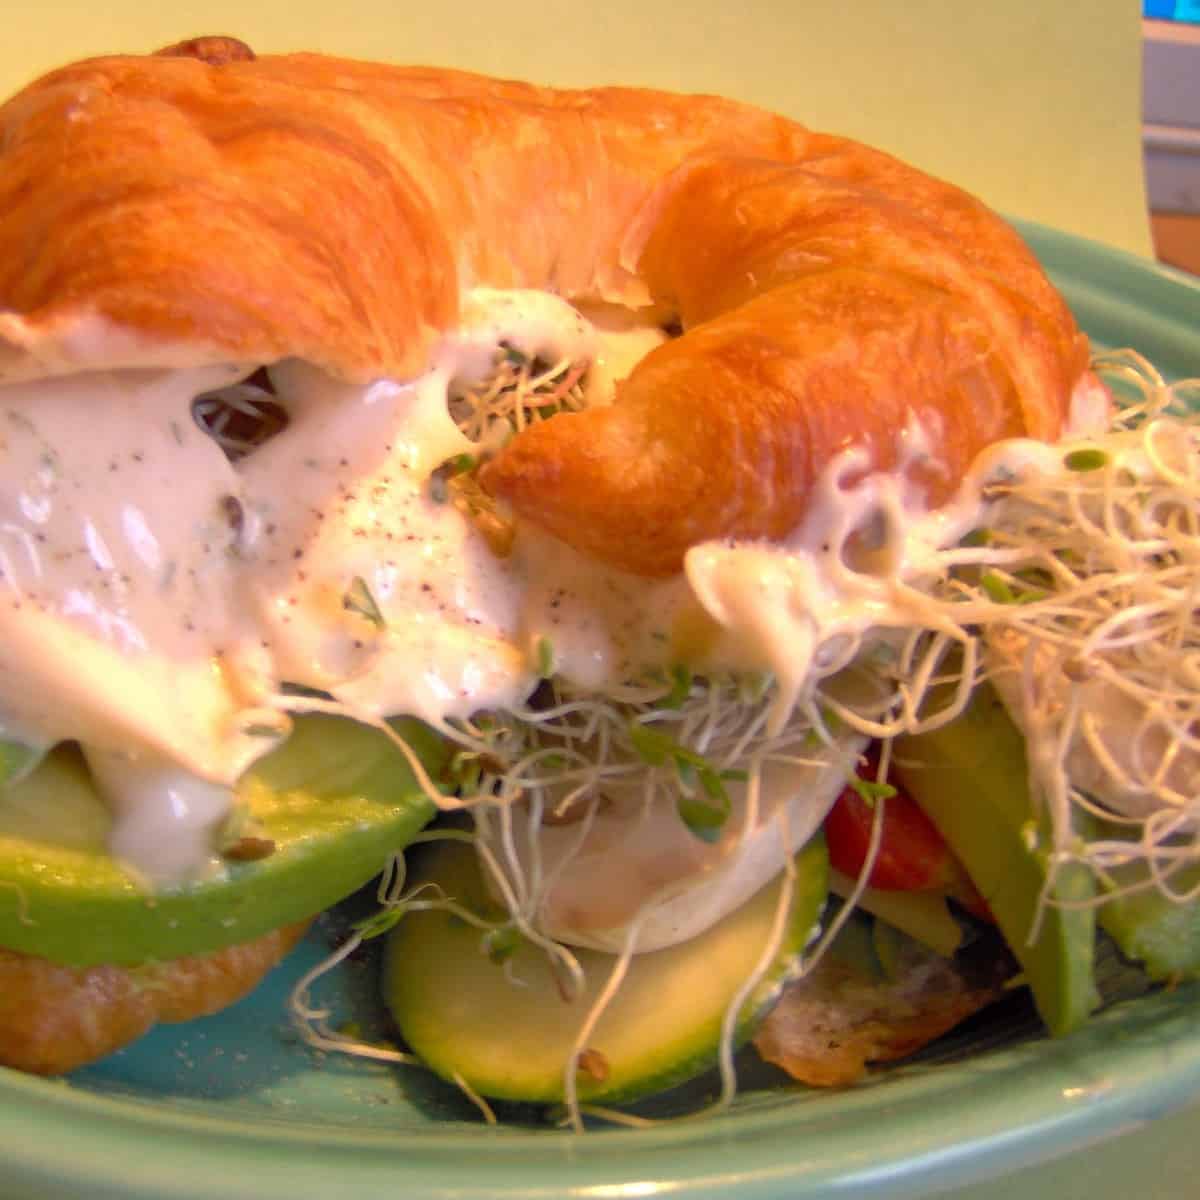  Start your morning off right with this delicious vegetarian croissant sandwich.